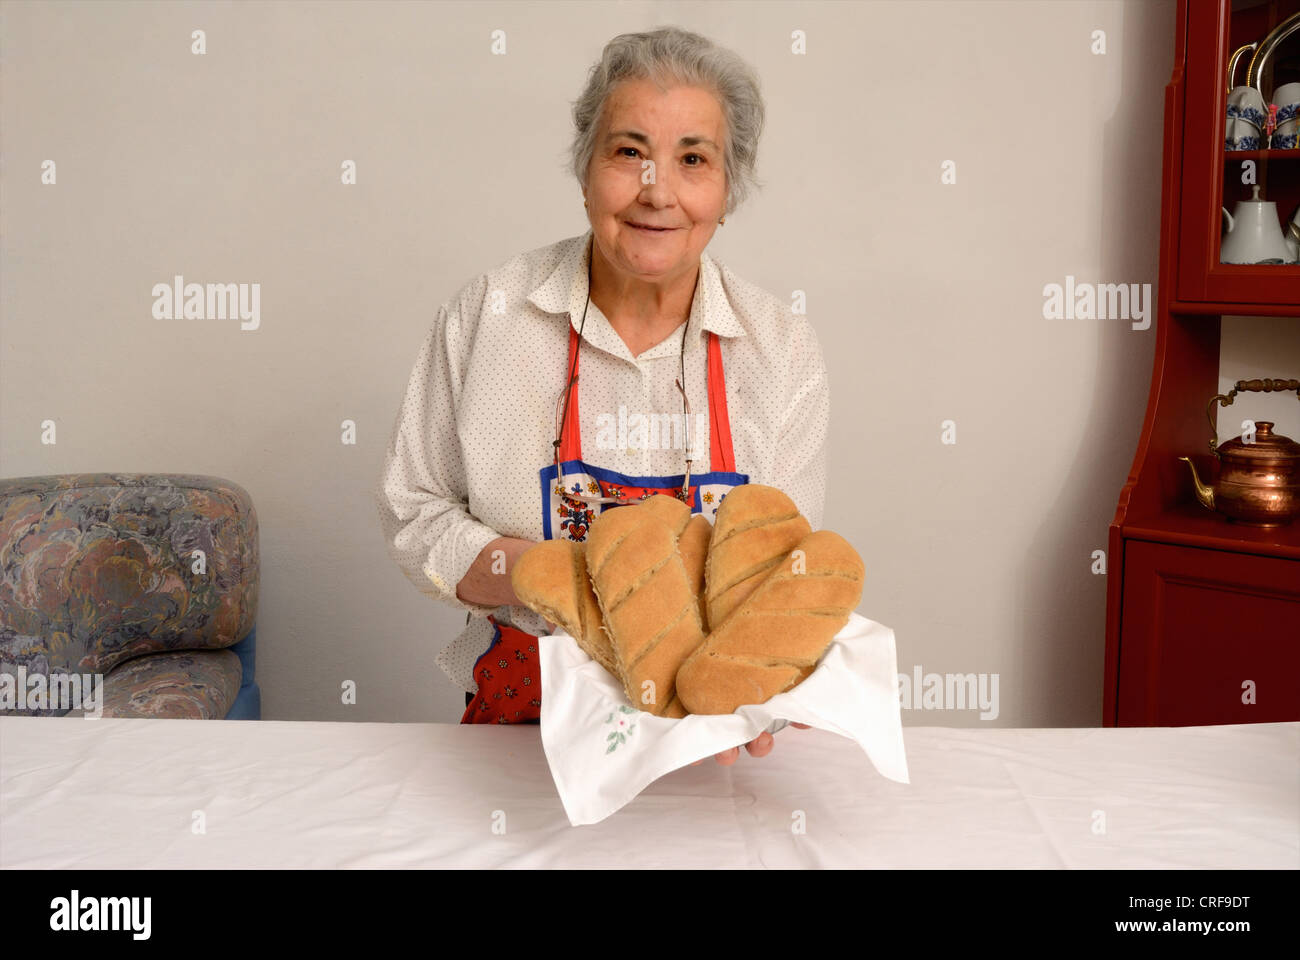 Older woman making bread in living room Stock Photo